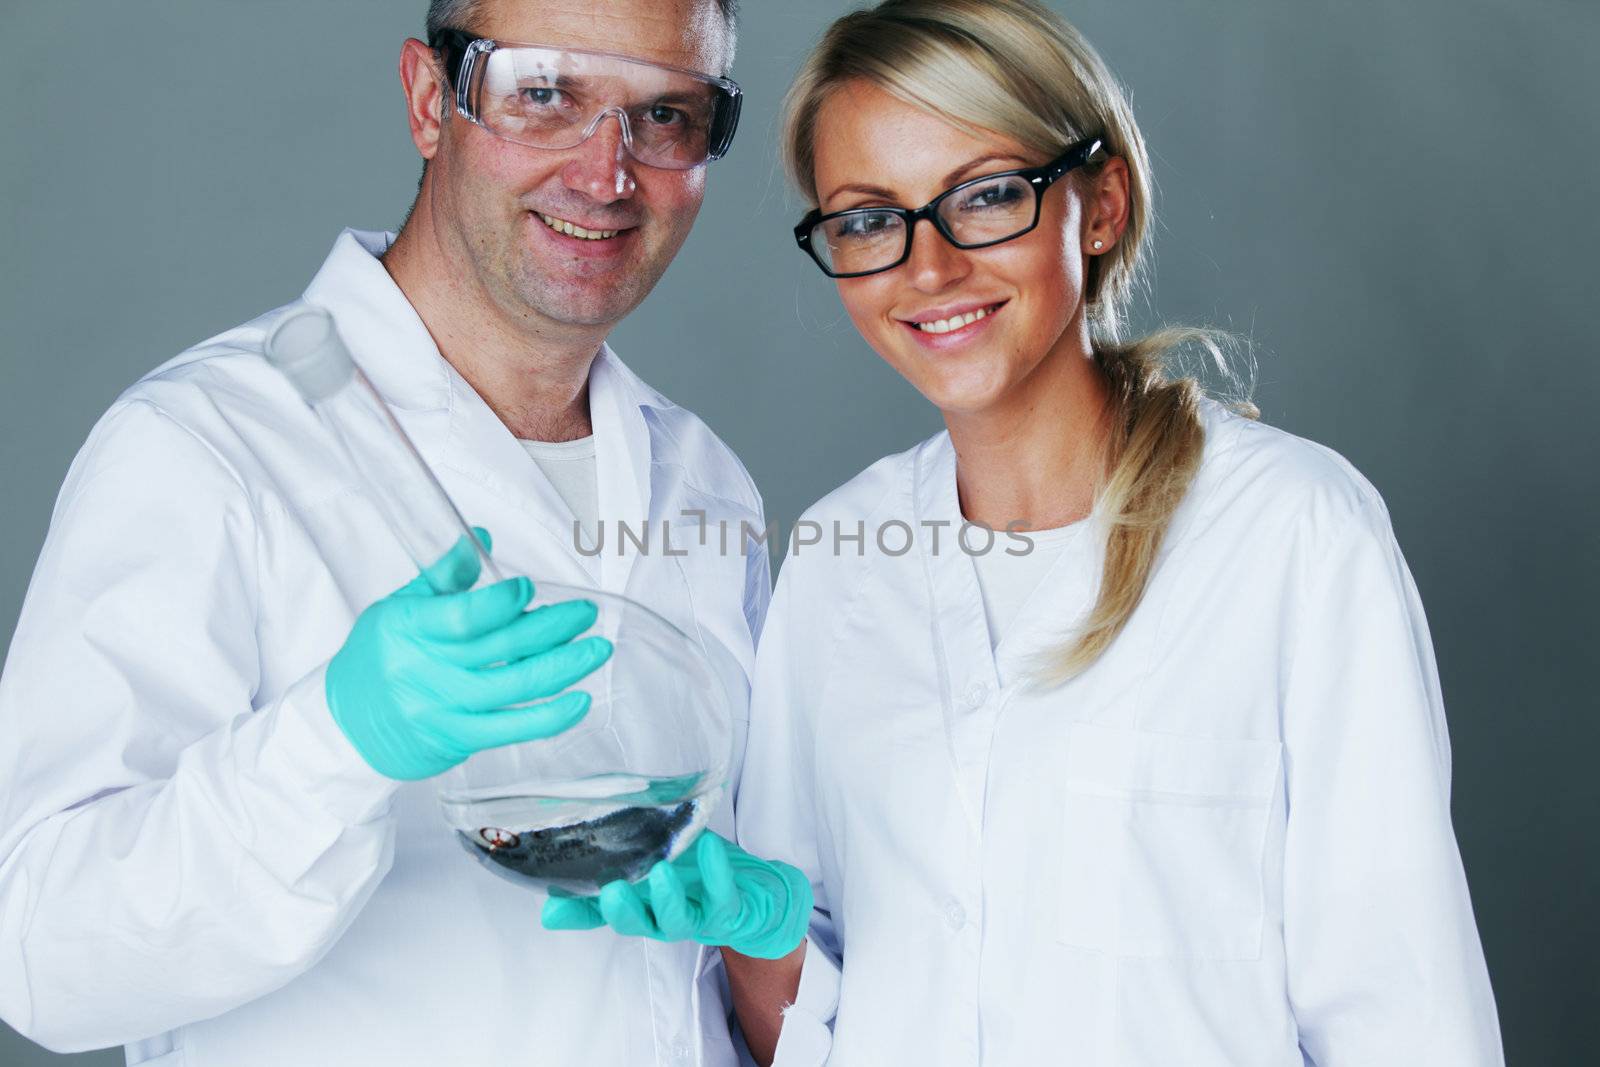  Chemistry researchers holding a secret green chemical substance